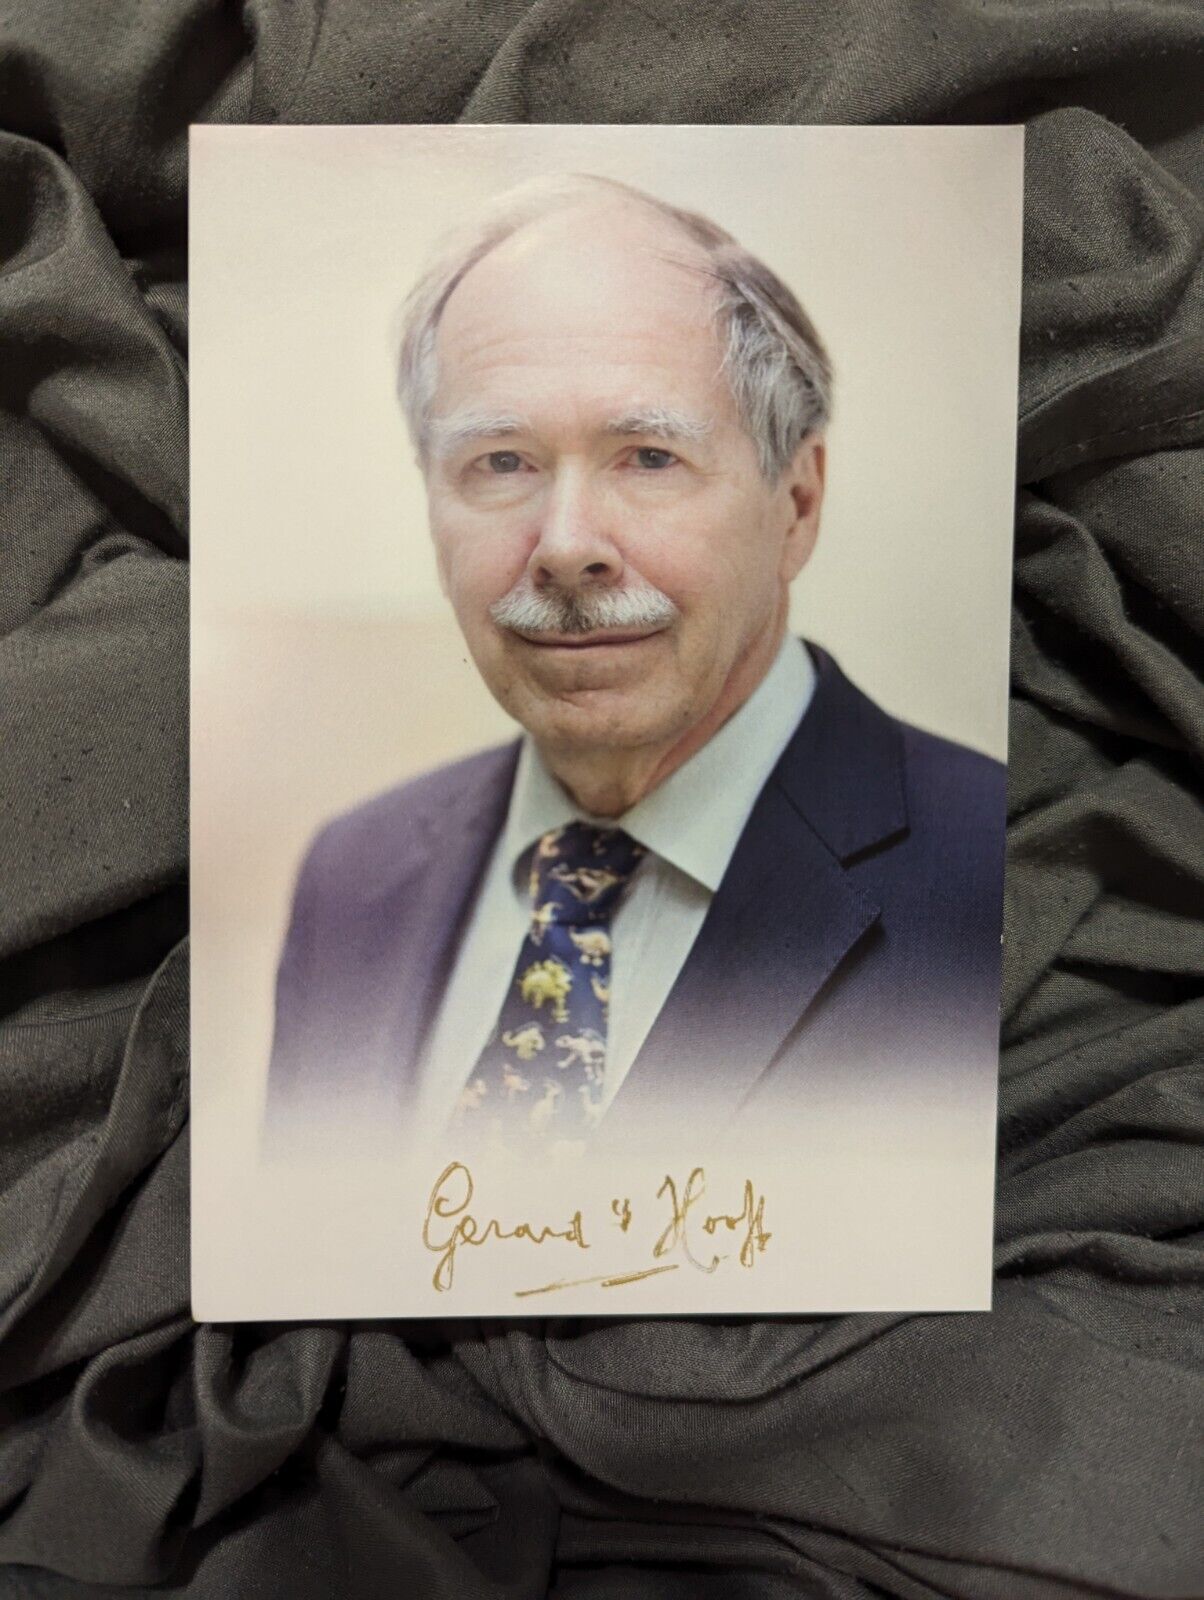 Gerard \'t Hooft Dutch theoretical physicist Signed Autographed Photo